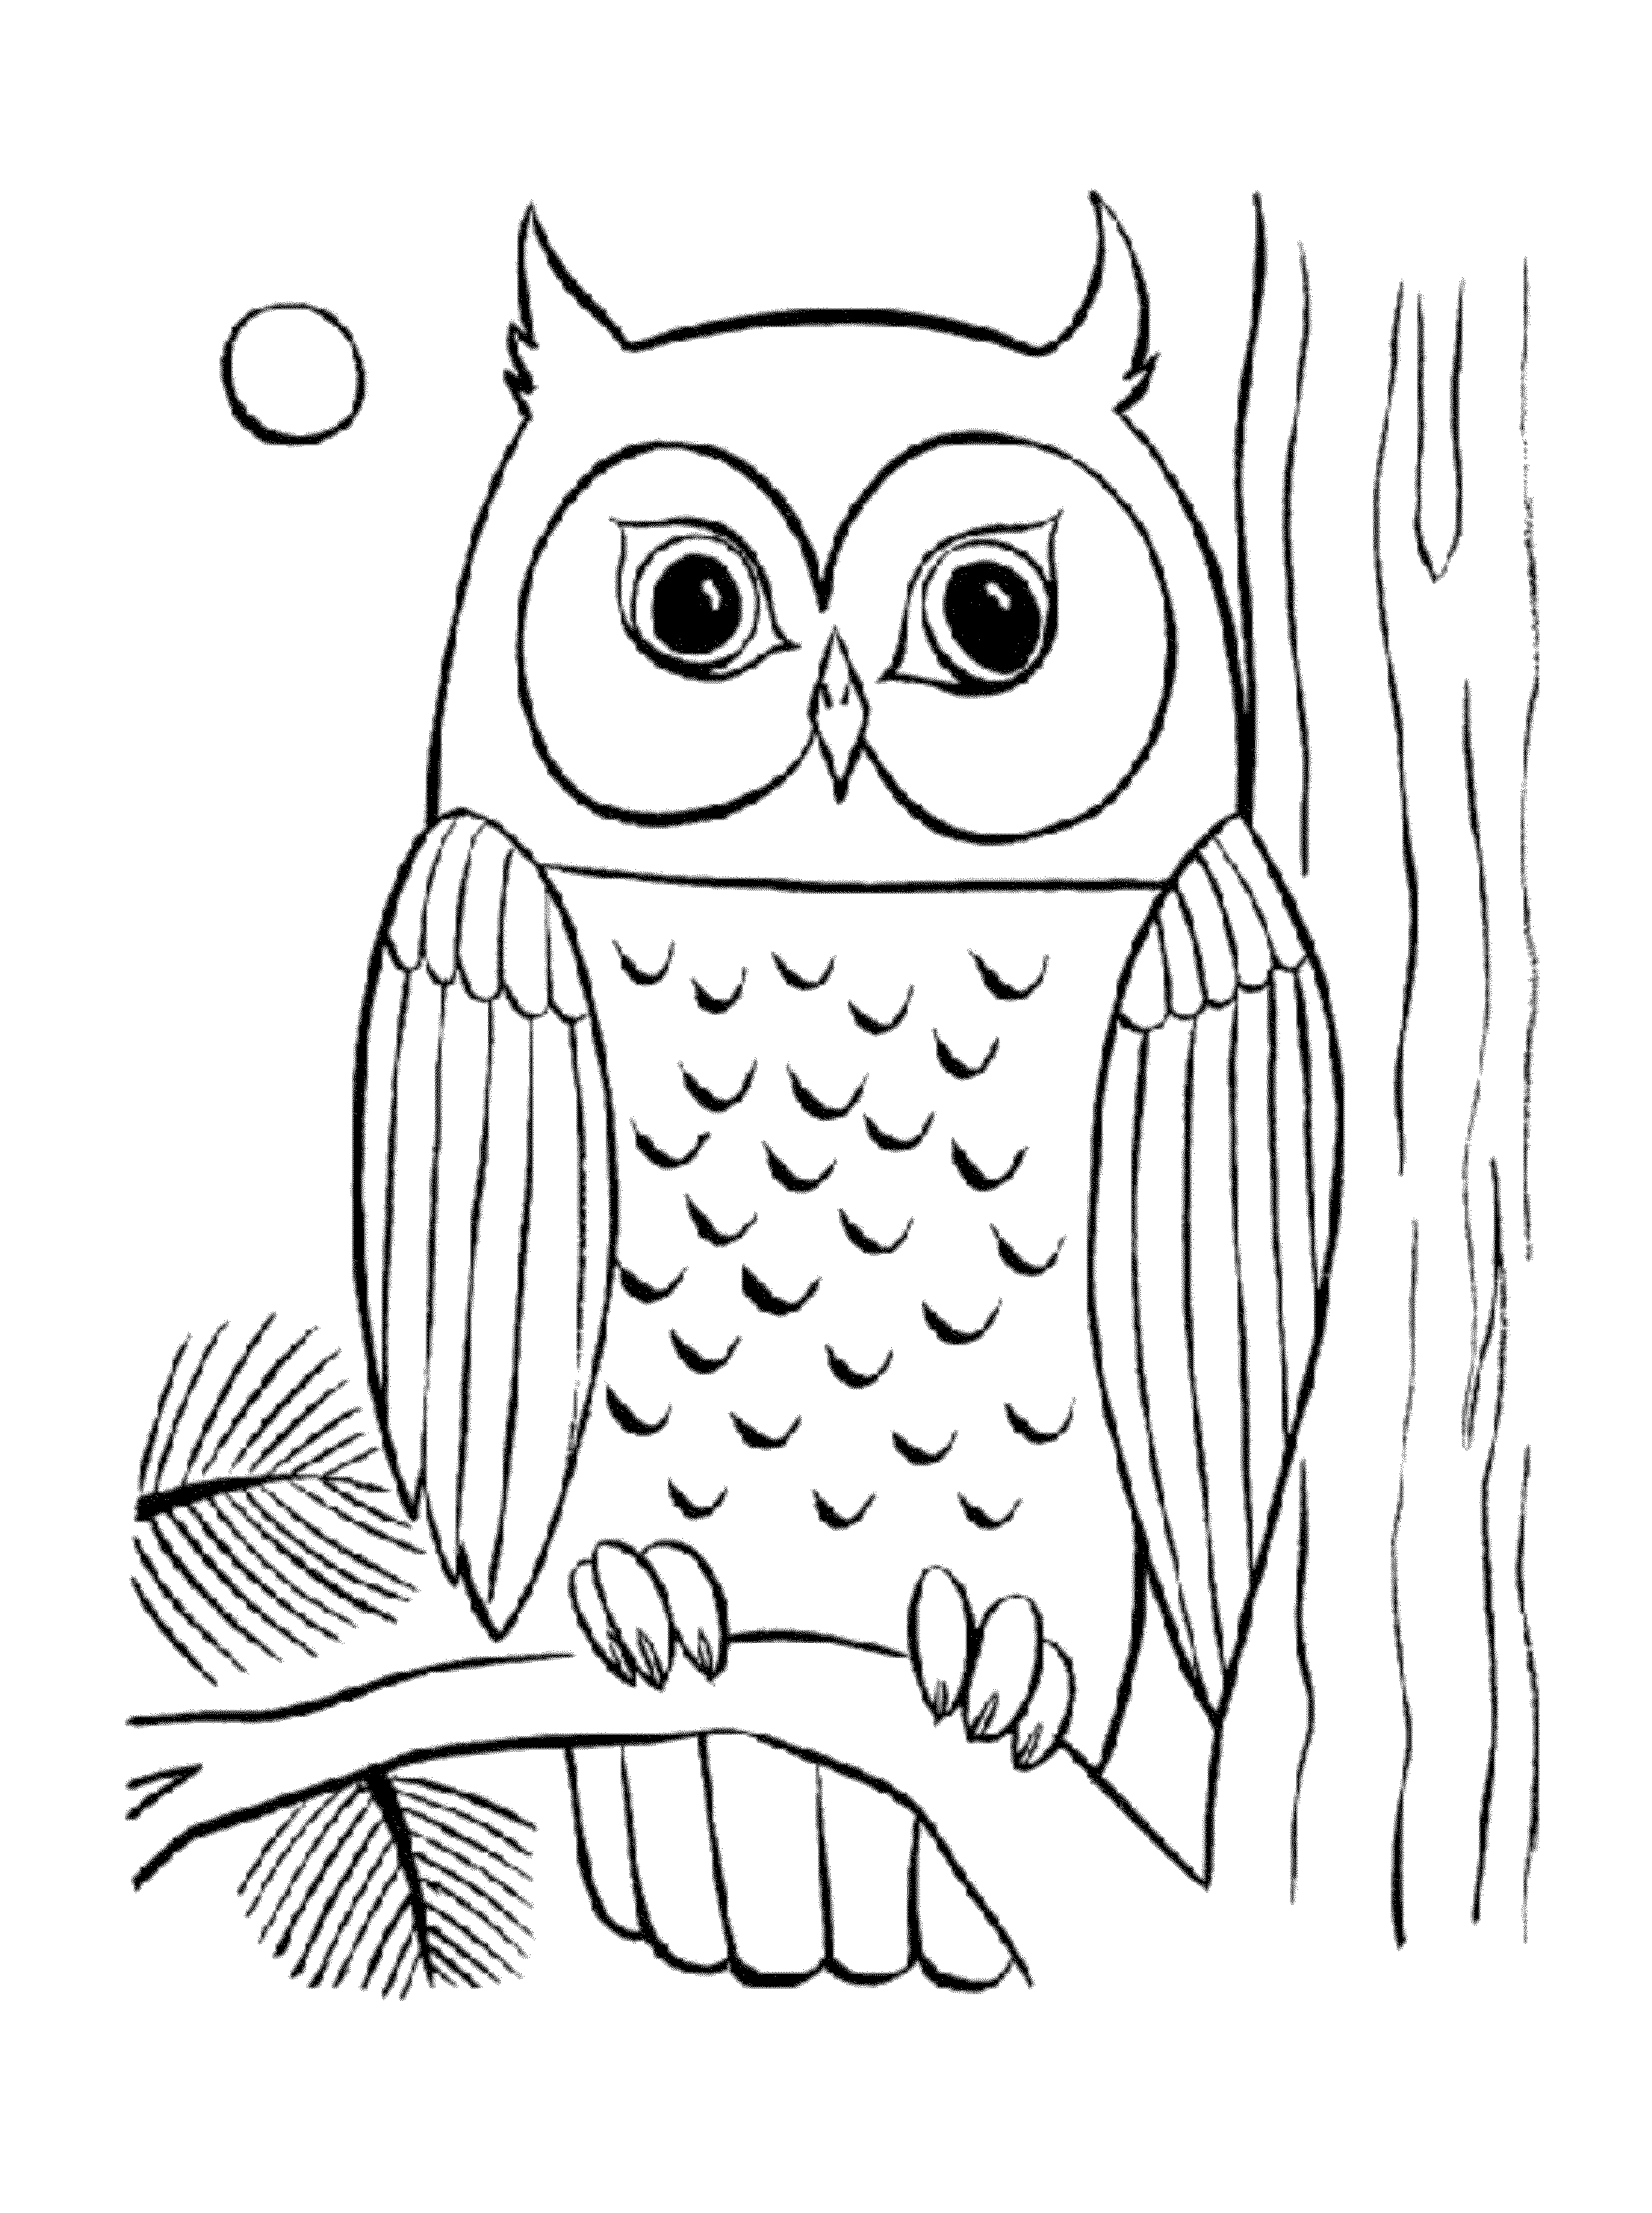 Cool Owl Coloring Pages - Coloring Home